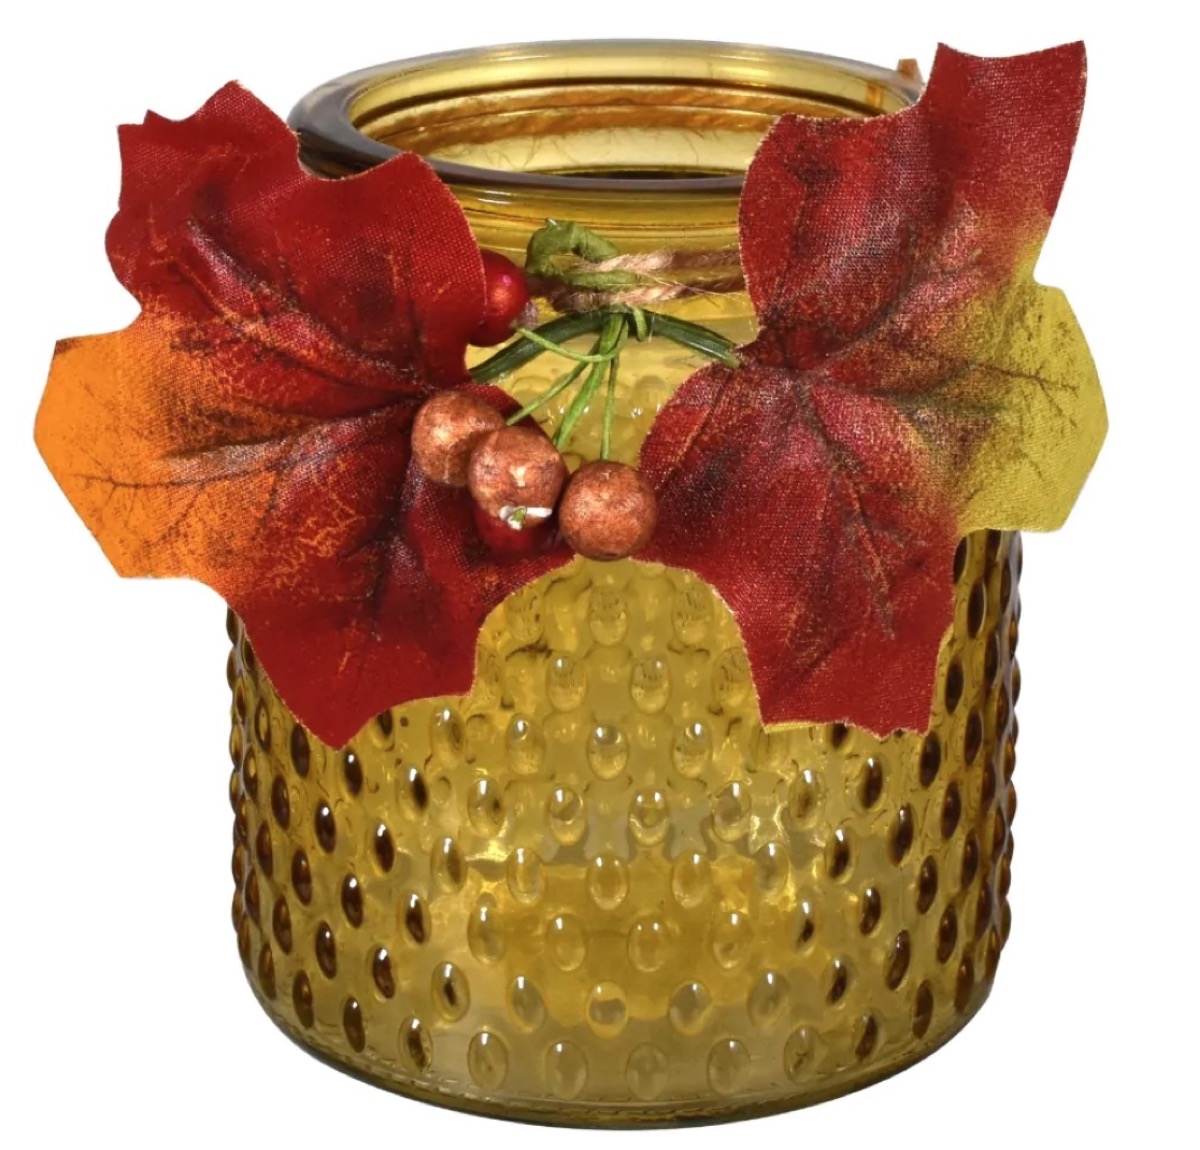 candle holder with leaves and holly berries, dollar store fall decor